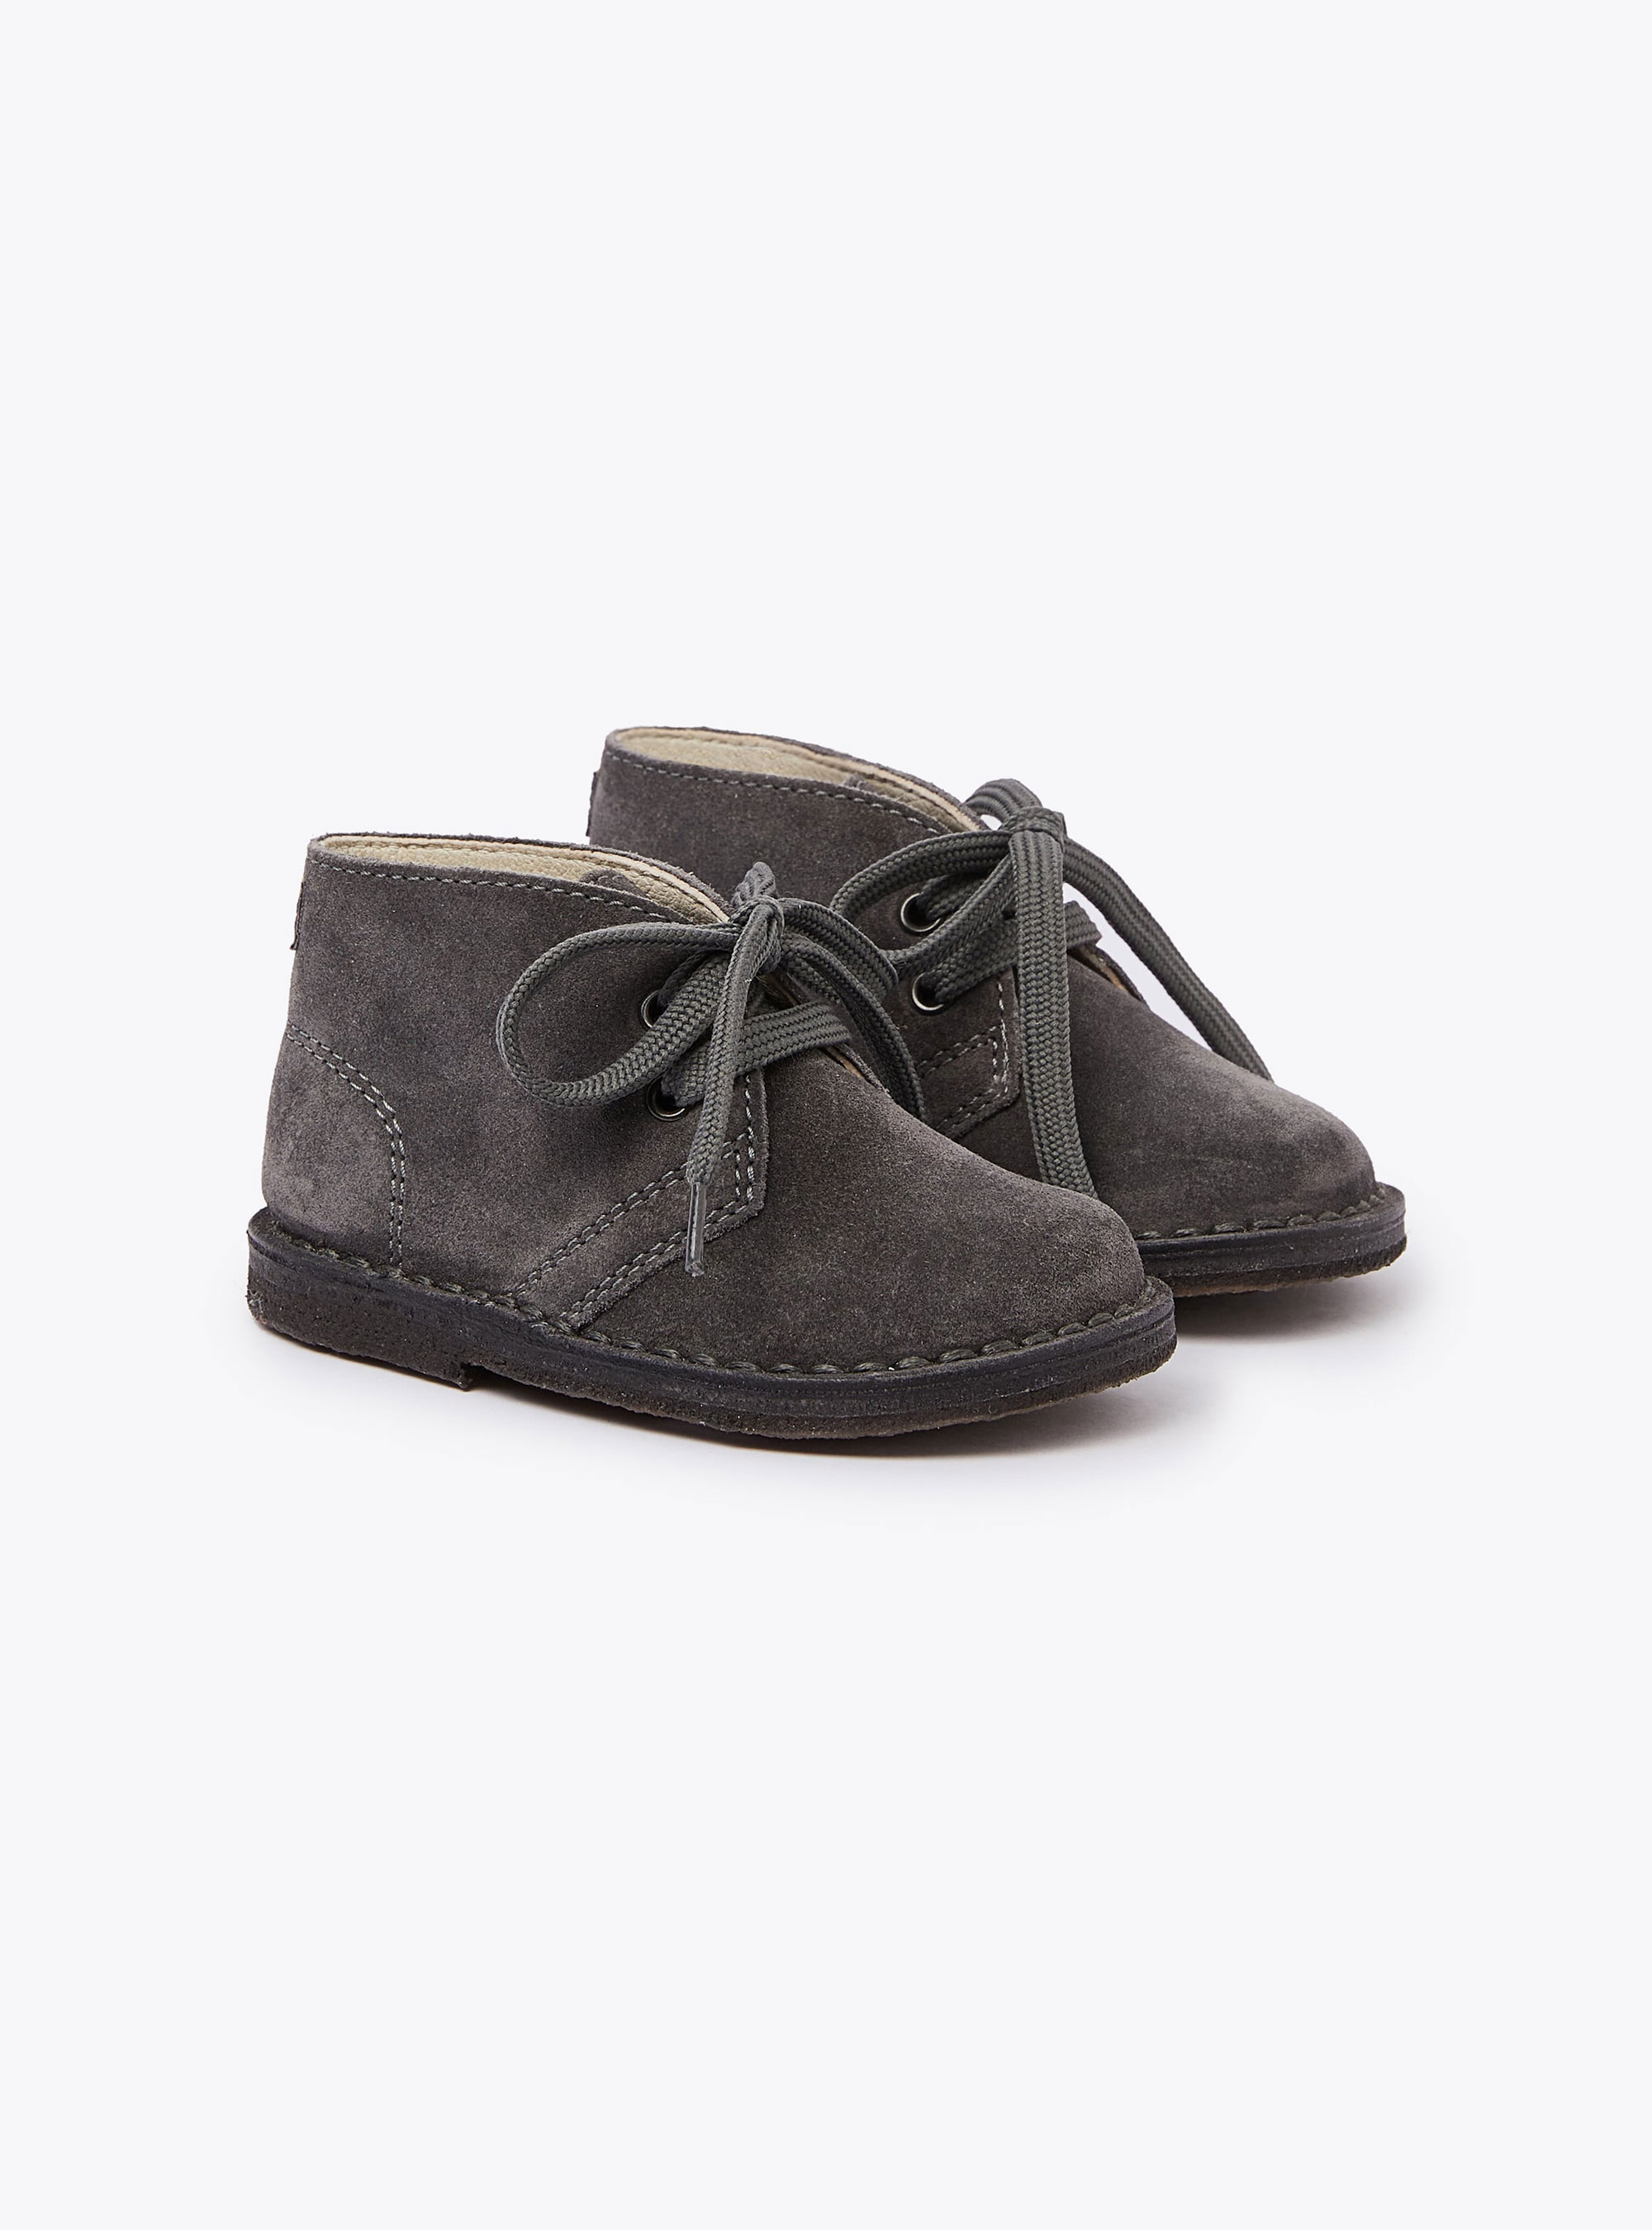 Charcoal grey suede baby shoes - Shoes - Il Gufo